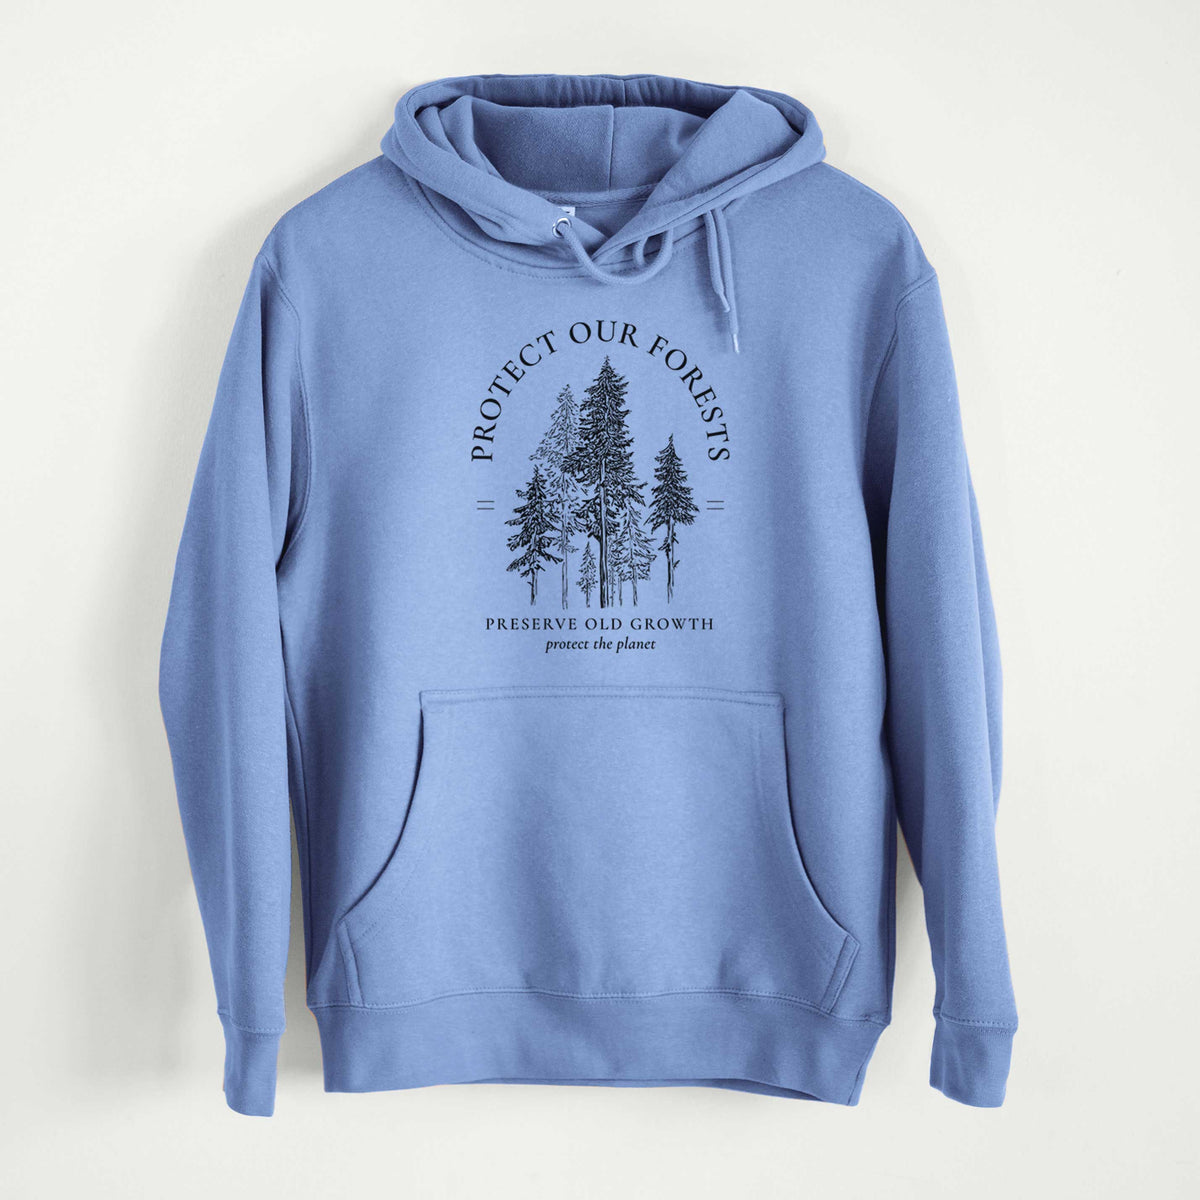 Protect our Forests - Preserve Old Growth  - Mid-Weight Unisex Premium Blend Hoodie